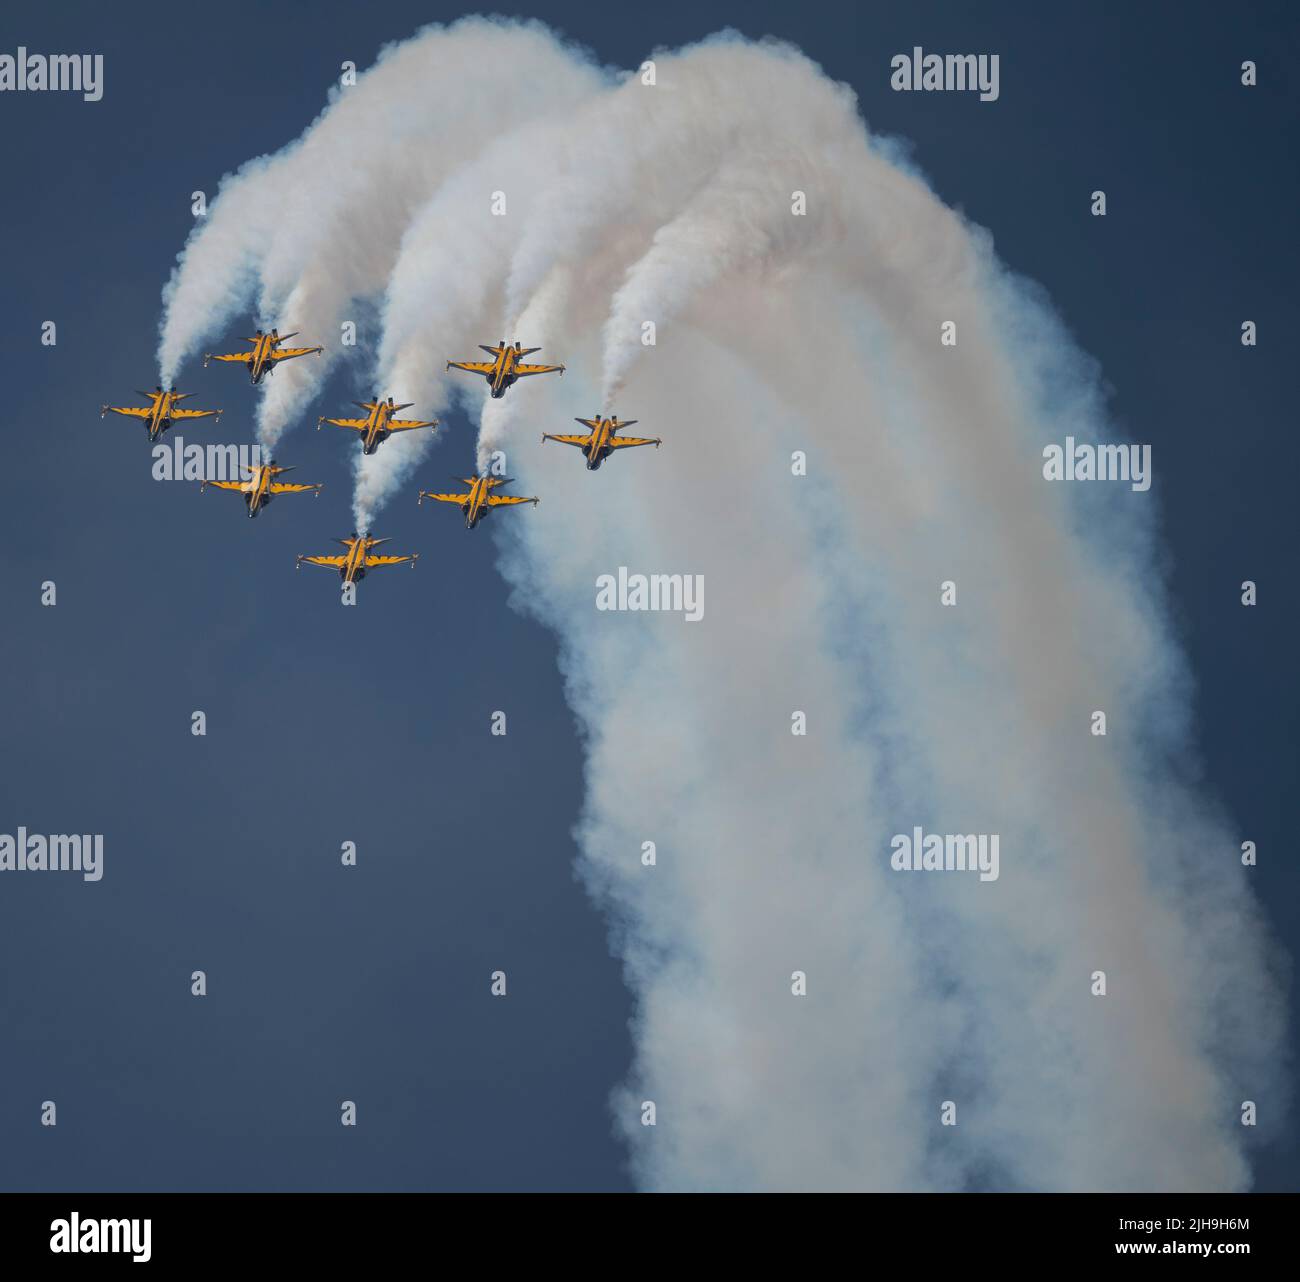 RAF Fairford, Gloucester, UK. 16 July 2022. Several hundred military aircraft of all shapes and sizes, from all eras and countries of the world, gather for one of the world’s largest airshows. Image: Military aerobatic teams display their flying skills. The Republic of Korea Air Force Black Eagles in action. Credit: Malcolm Park/Alamy Live News Stock Photo